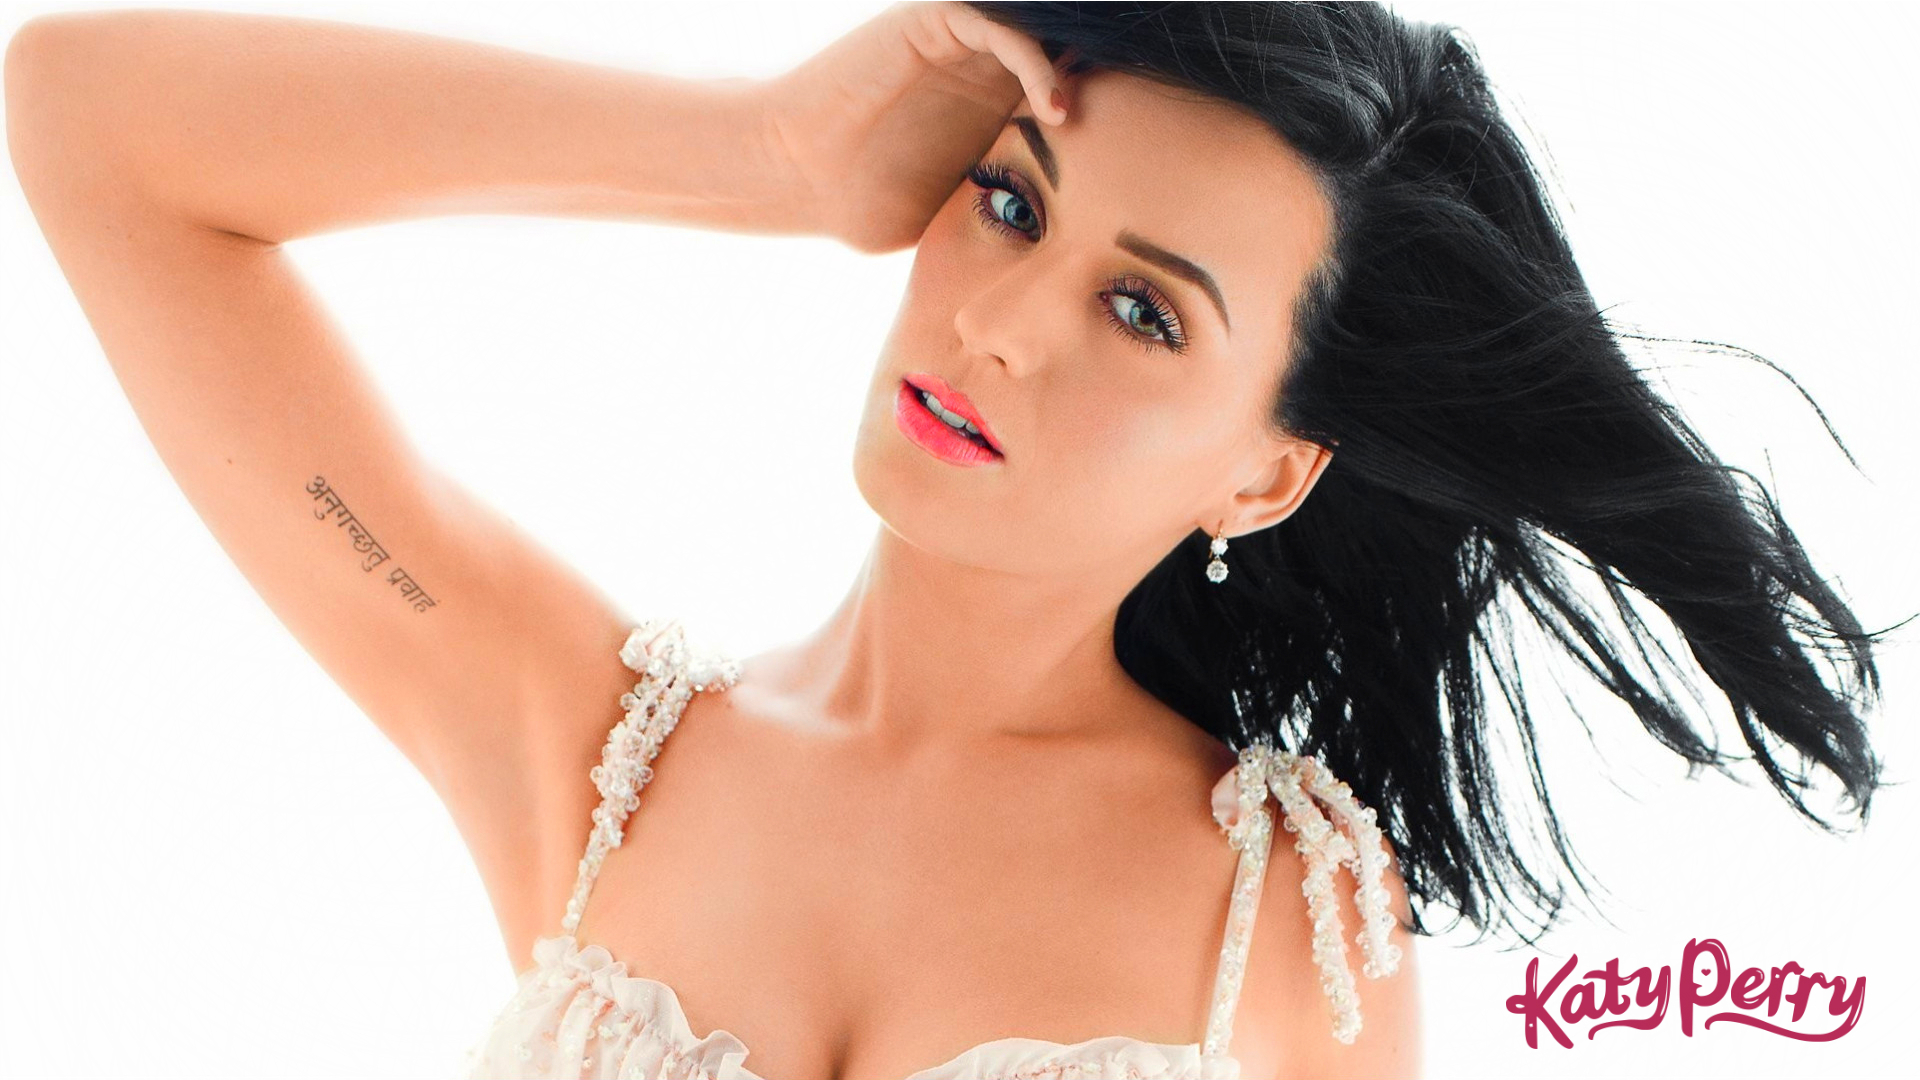 Katy Perrys download Wallpapers